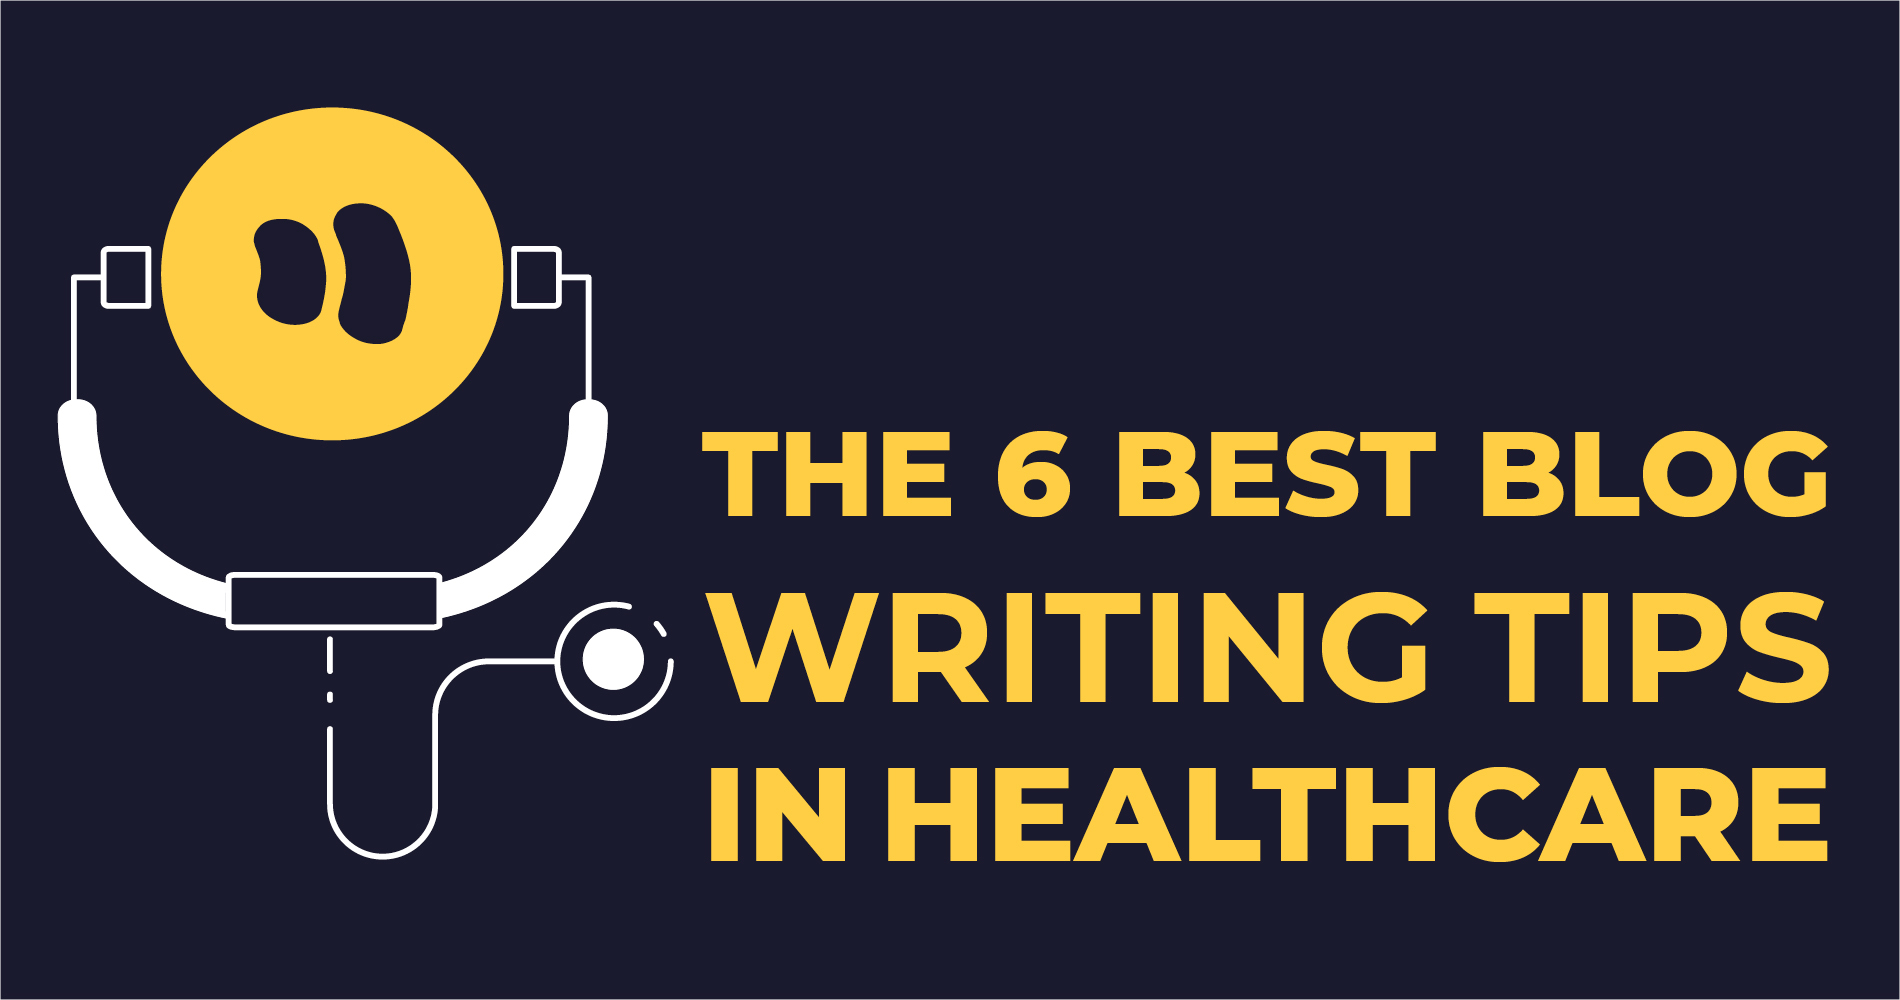 The 6 best blog writing tips for the healthcare industry you’ll find…for free!